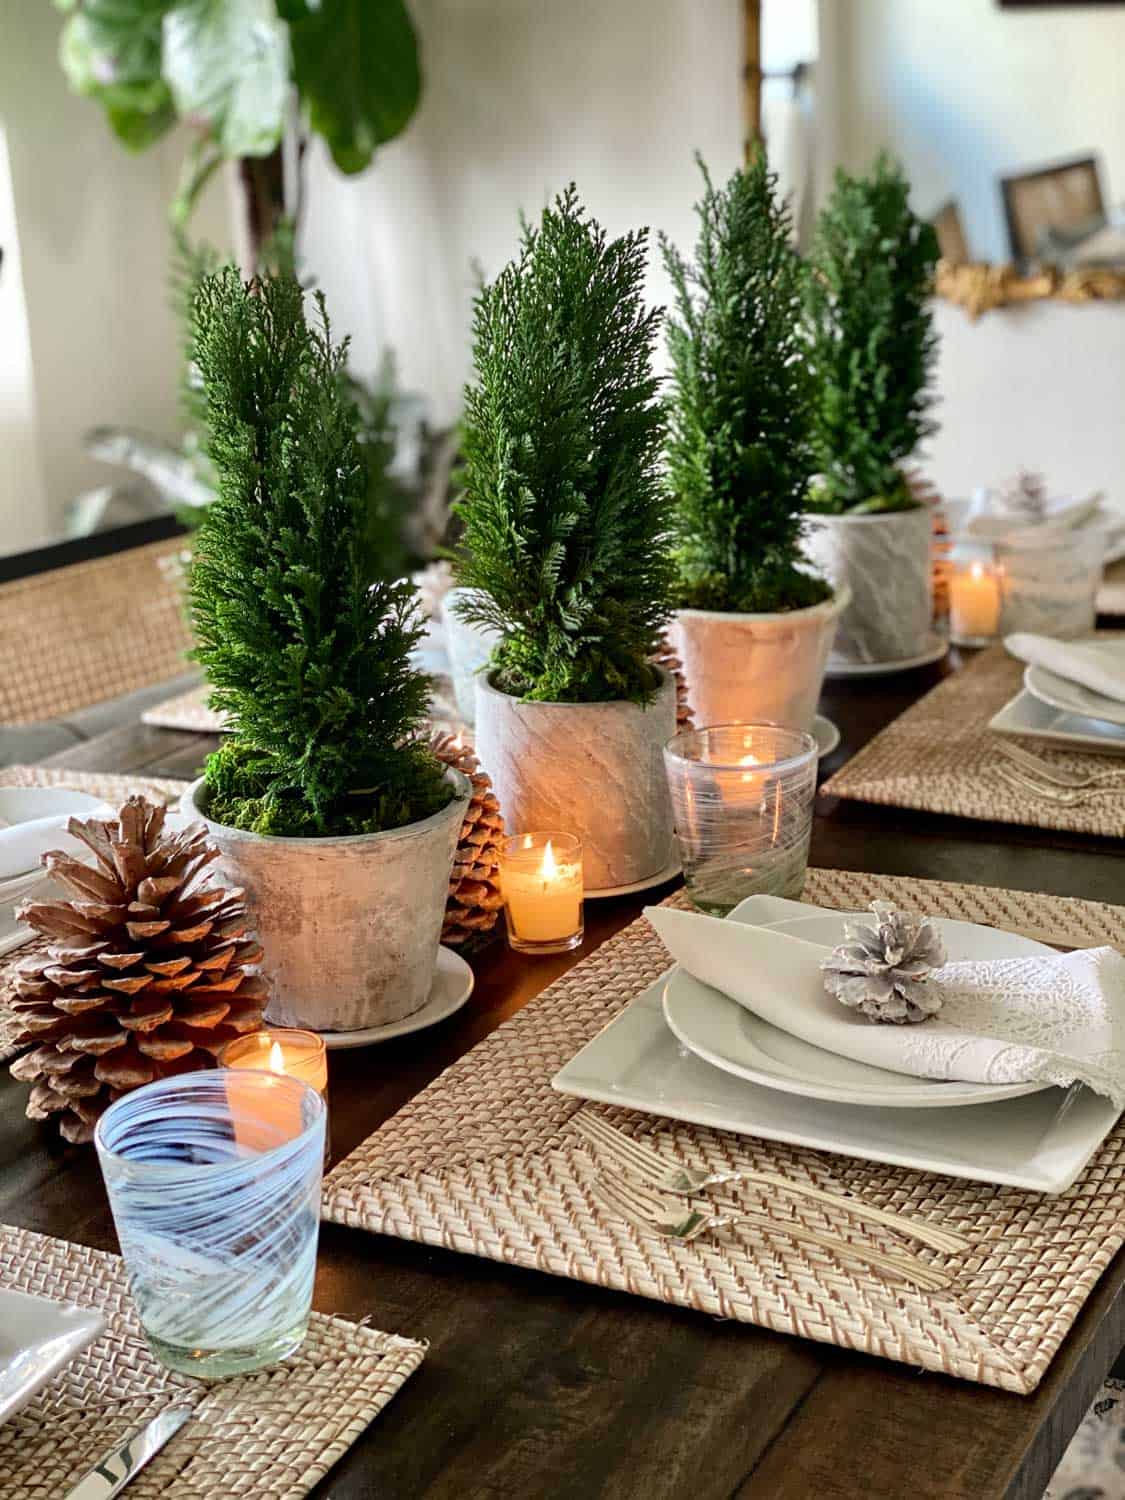 Lifestyle Blogger Mary Ann Pickett's Winter Table with Mini Cypress Trees and Pinecones